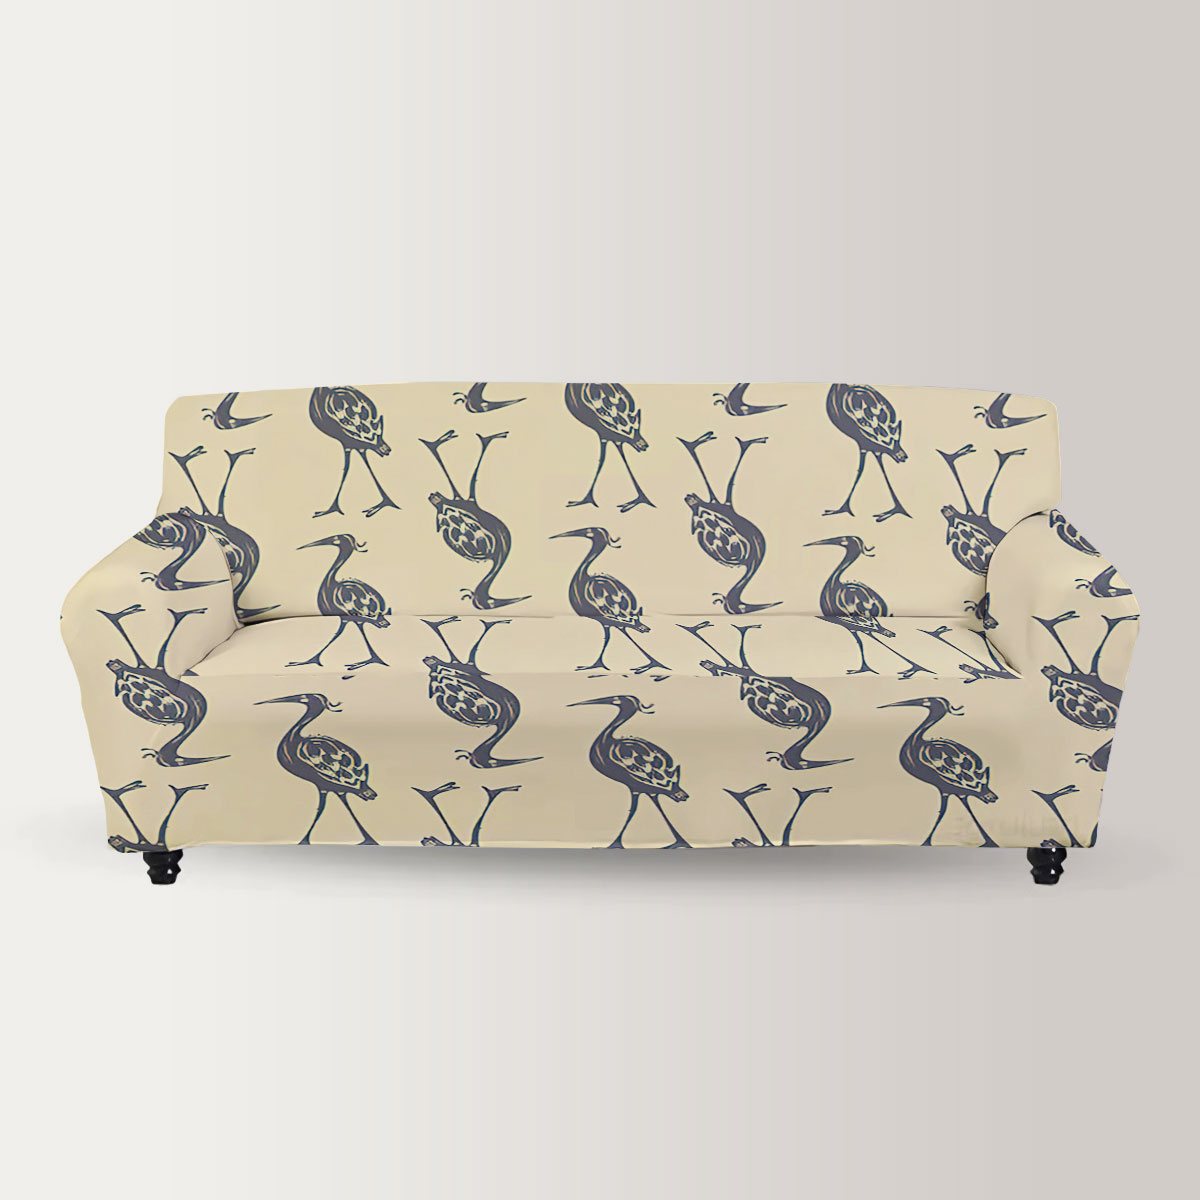 Up And Down Heron Art Sofa Cover